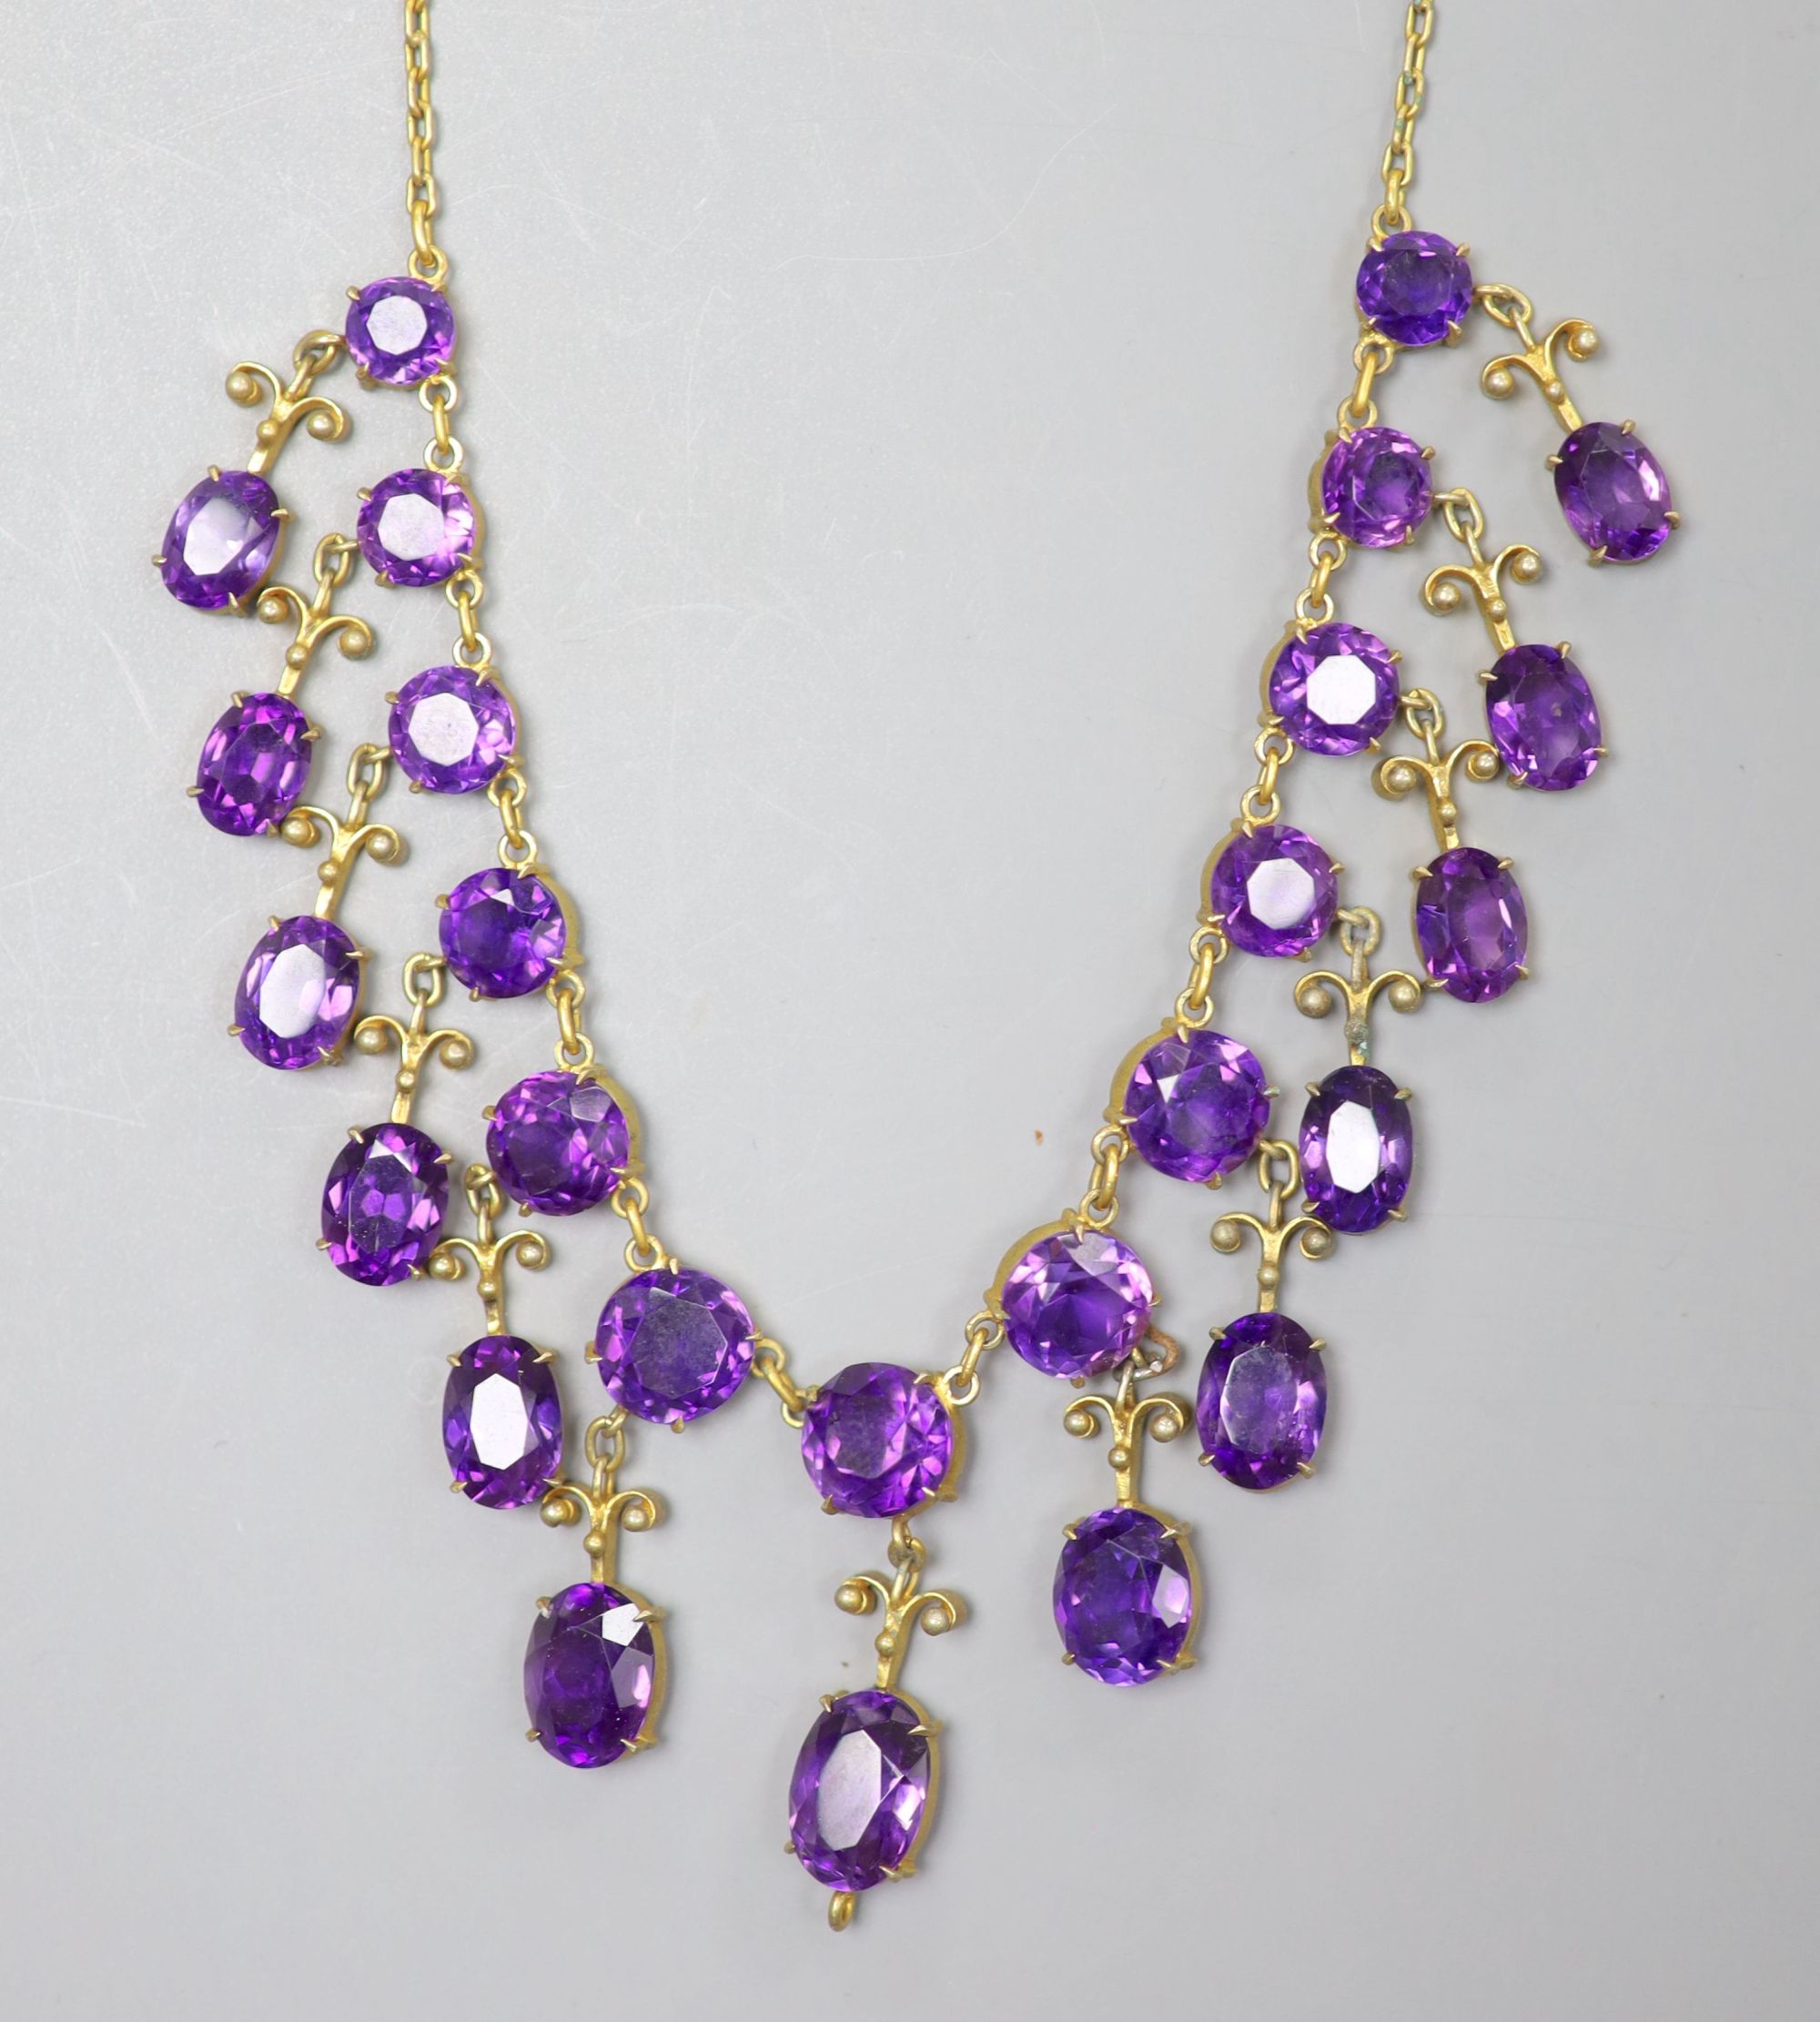 A 19th century gilt metal and oval cut amethyst set drop fringe necklace, 46cm (drop missing from bottom of necklace).